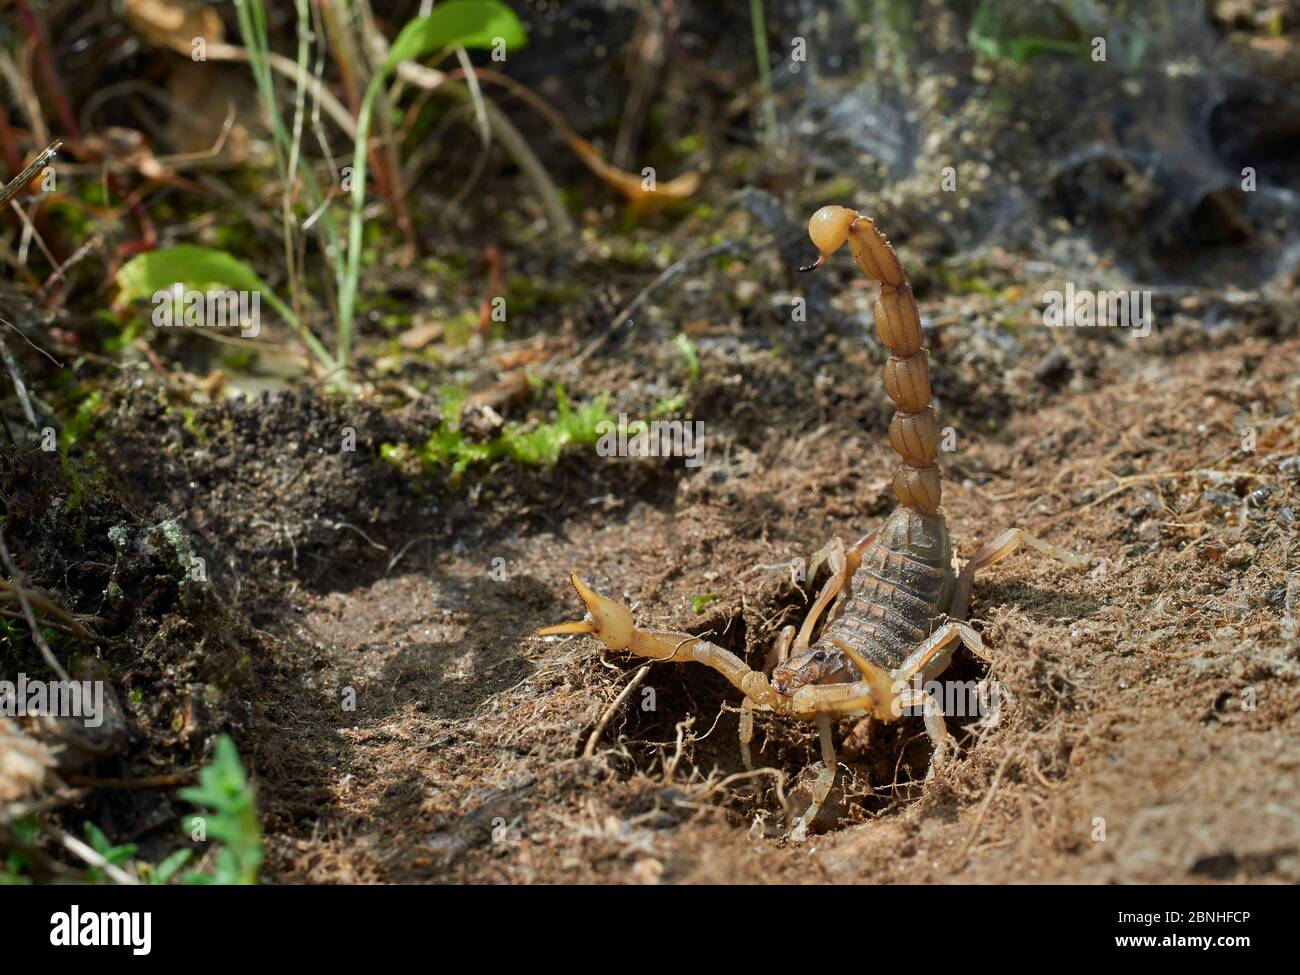 Scorpion (Buthus occitanus) in defensive stance at entrance to burrow under stone, Exremadura, Spain Stock Photo